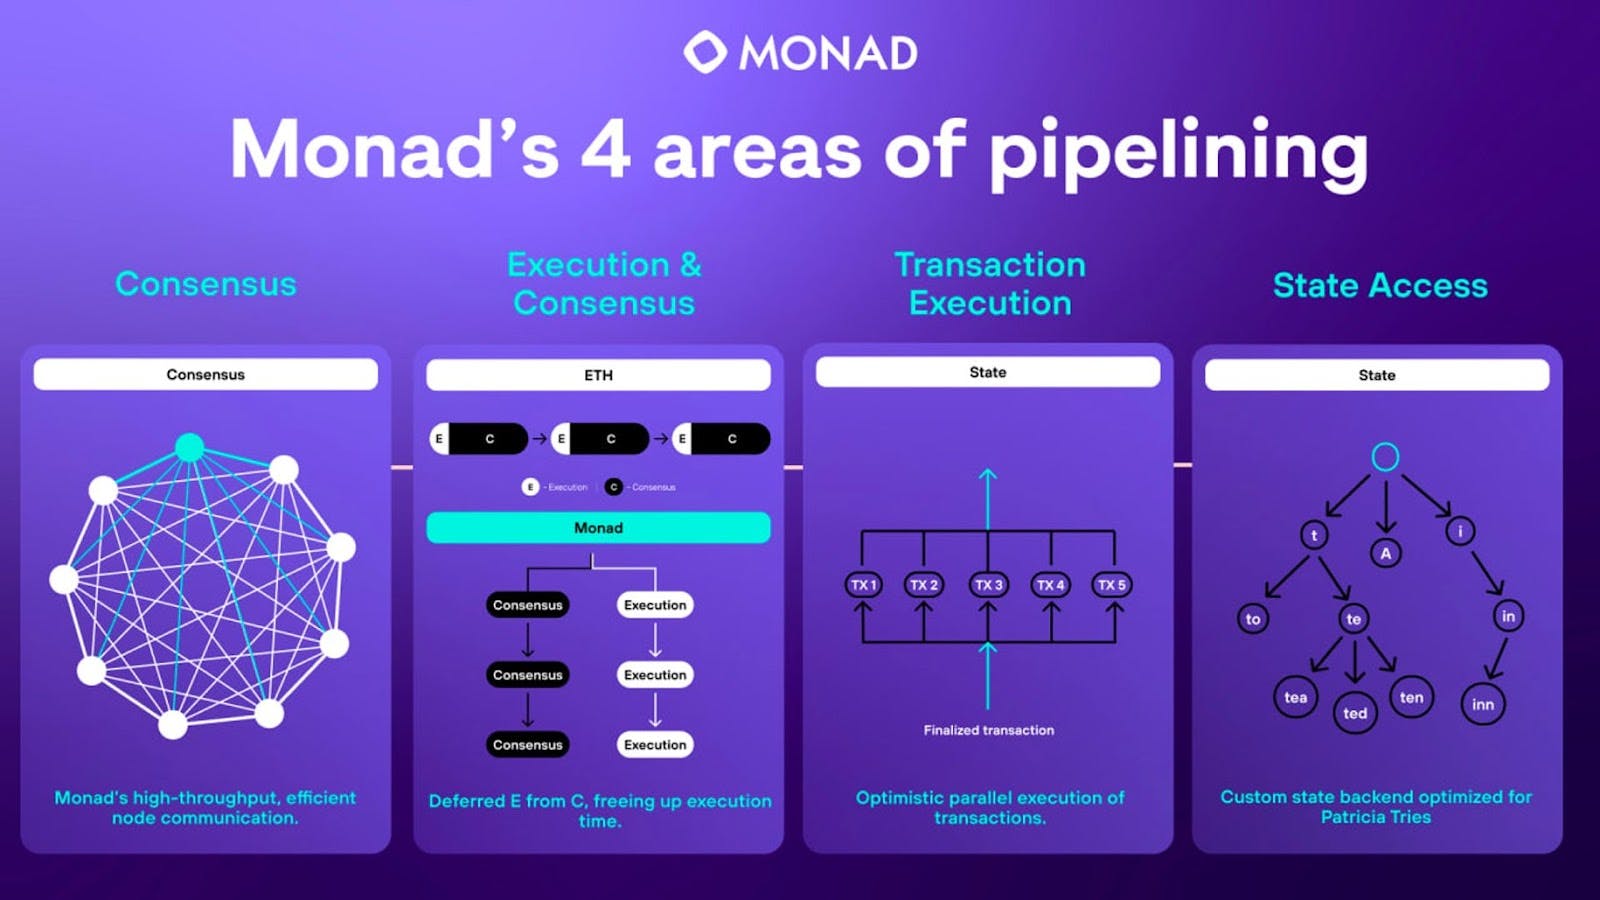 Ingeniously, Monad implements pipelining in four main ways to exponentially improve the scalability and transaction throughput of the network. These include pipelining at the consensus level, during transaction execution, between the execution and consensus phases, and at the state access level. (Image Credit: Monad Twitter post via Monad Twitter)